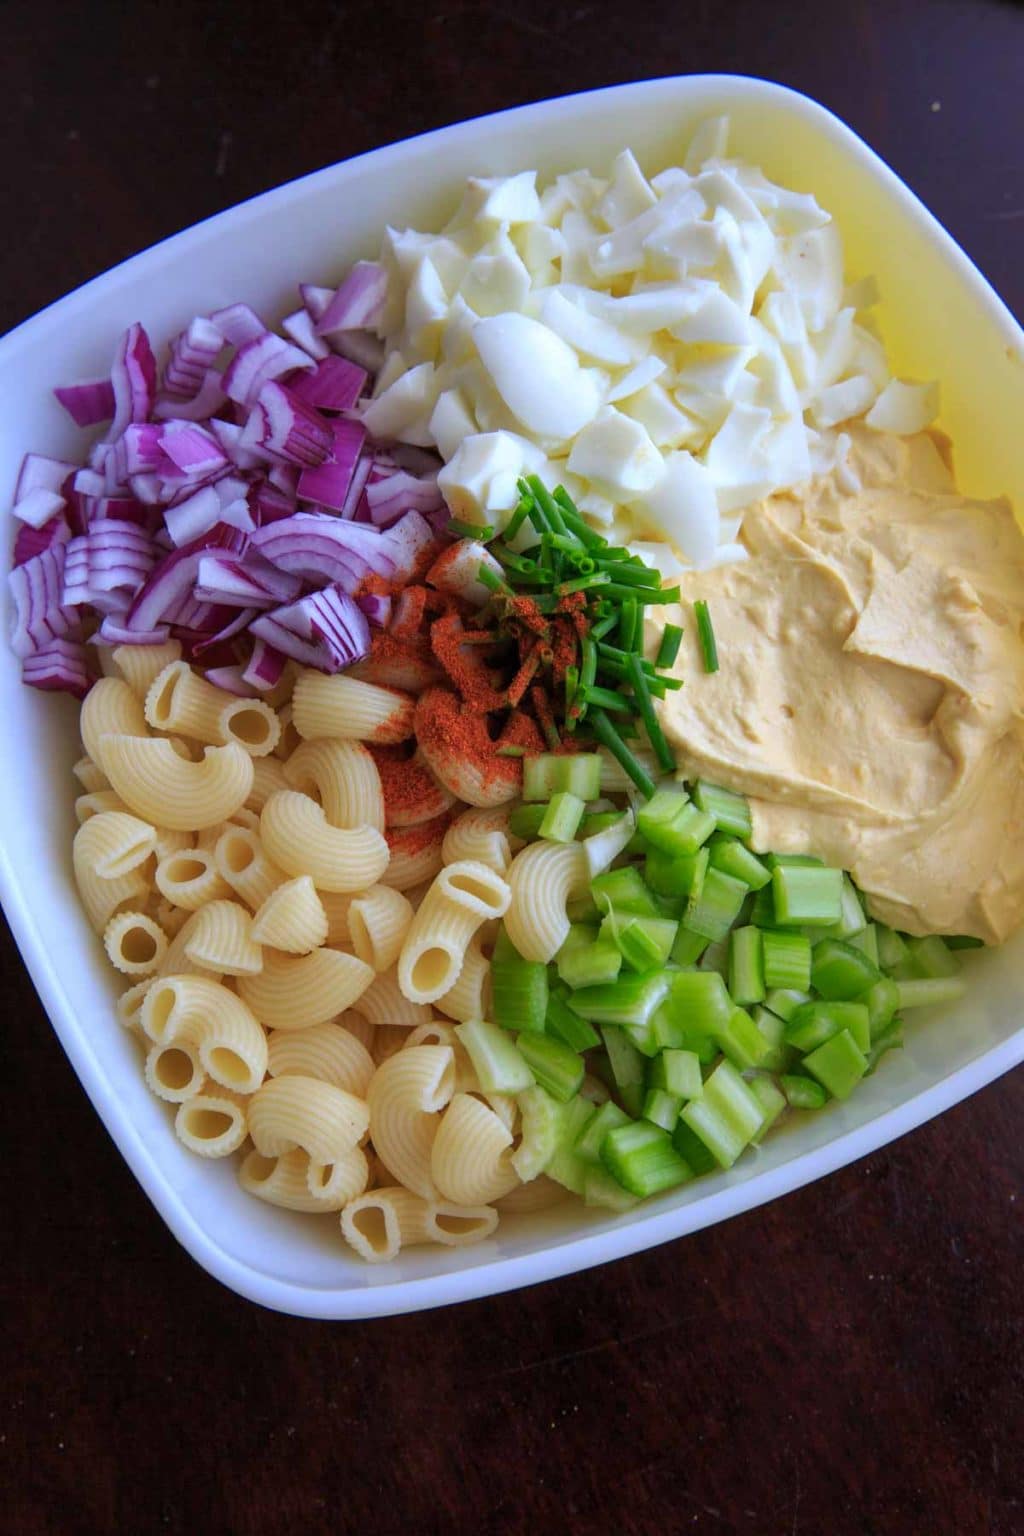 Deconstructed deviled egg pasta salad with macaroni, celery, onion, egg white and deviled egg mixture..